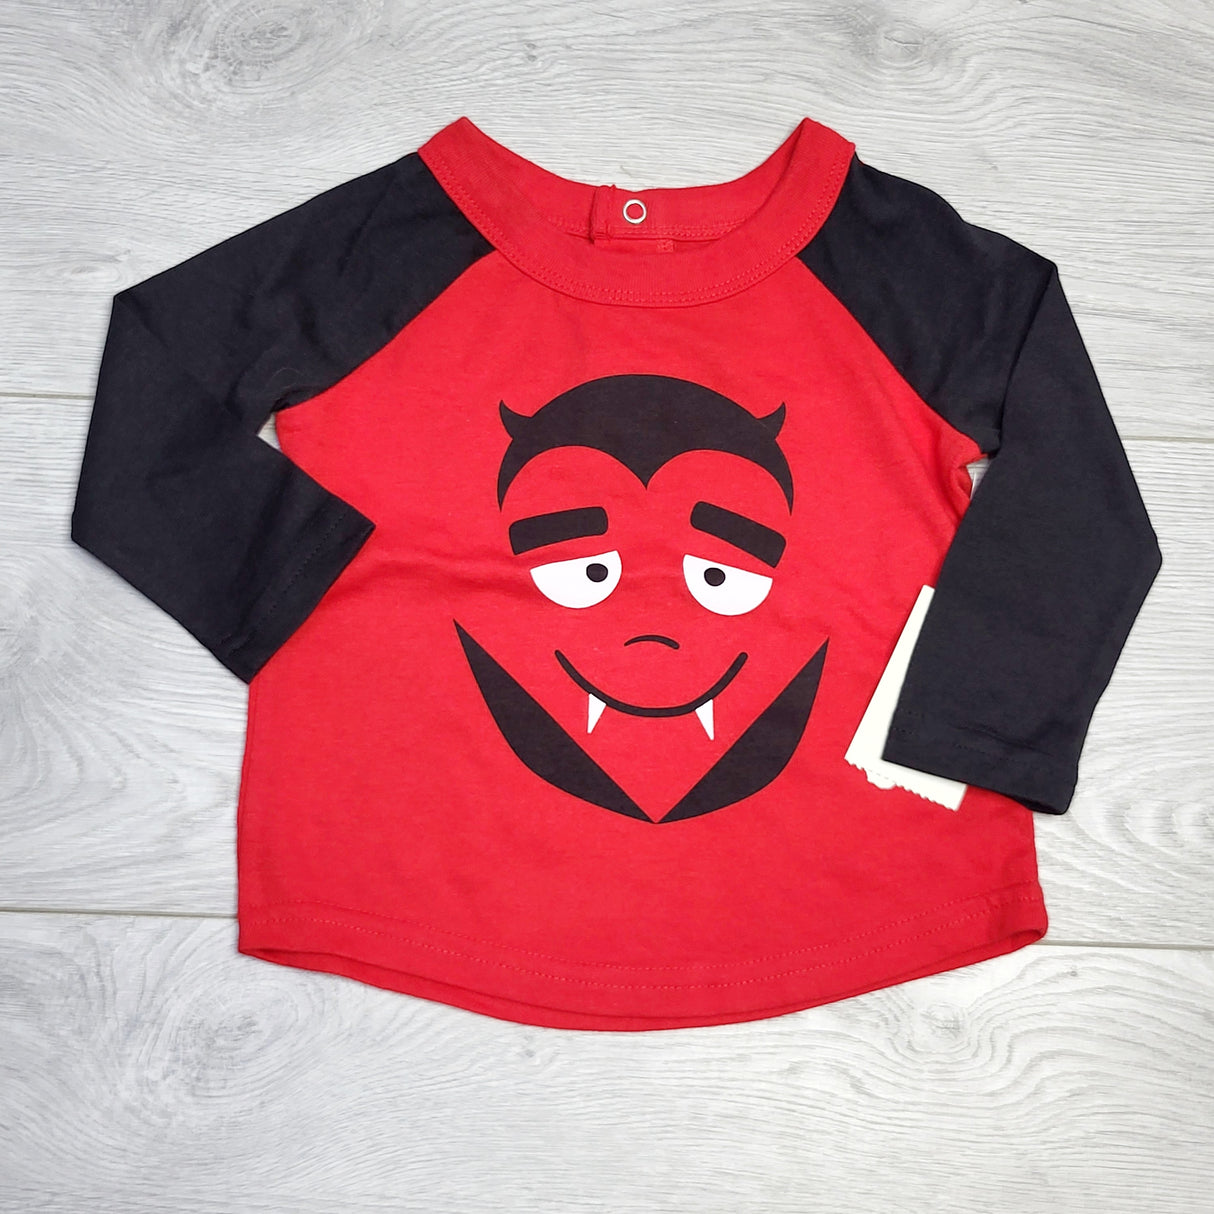 RZA2 - George vampire top. Size 6-12 months